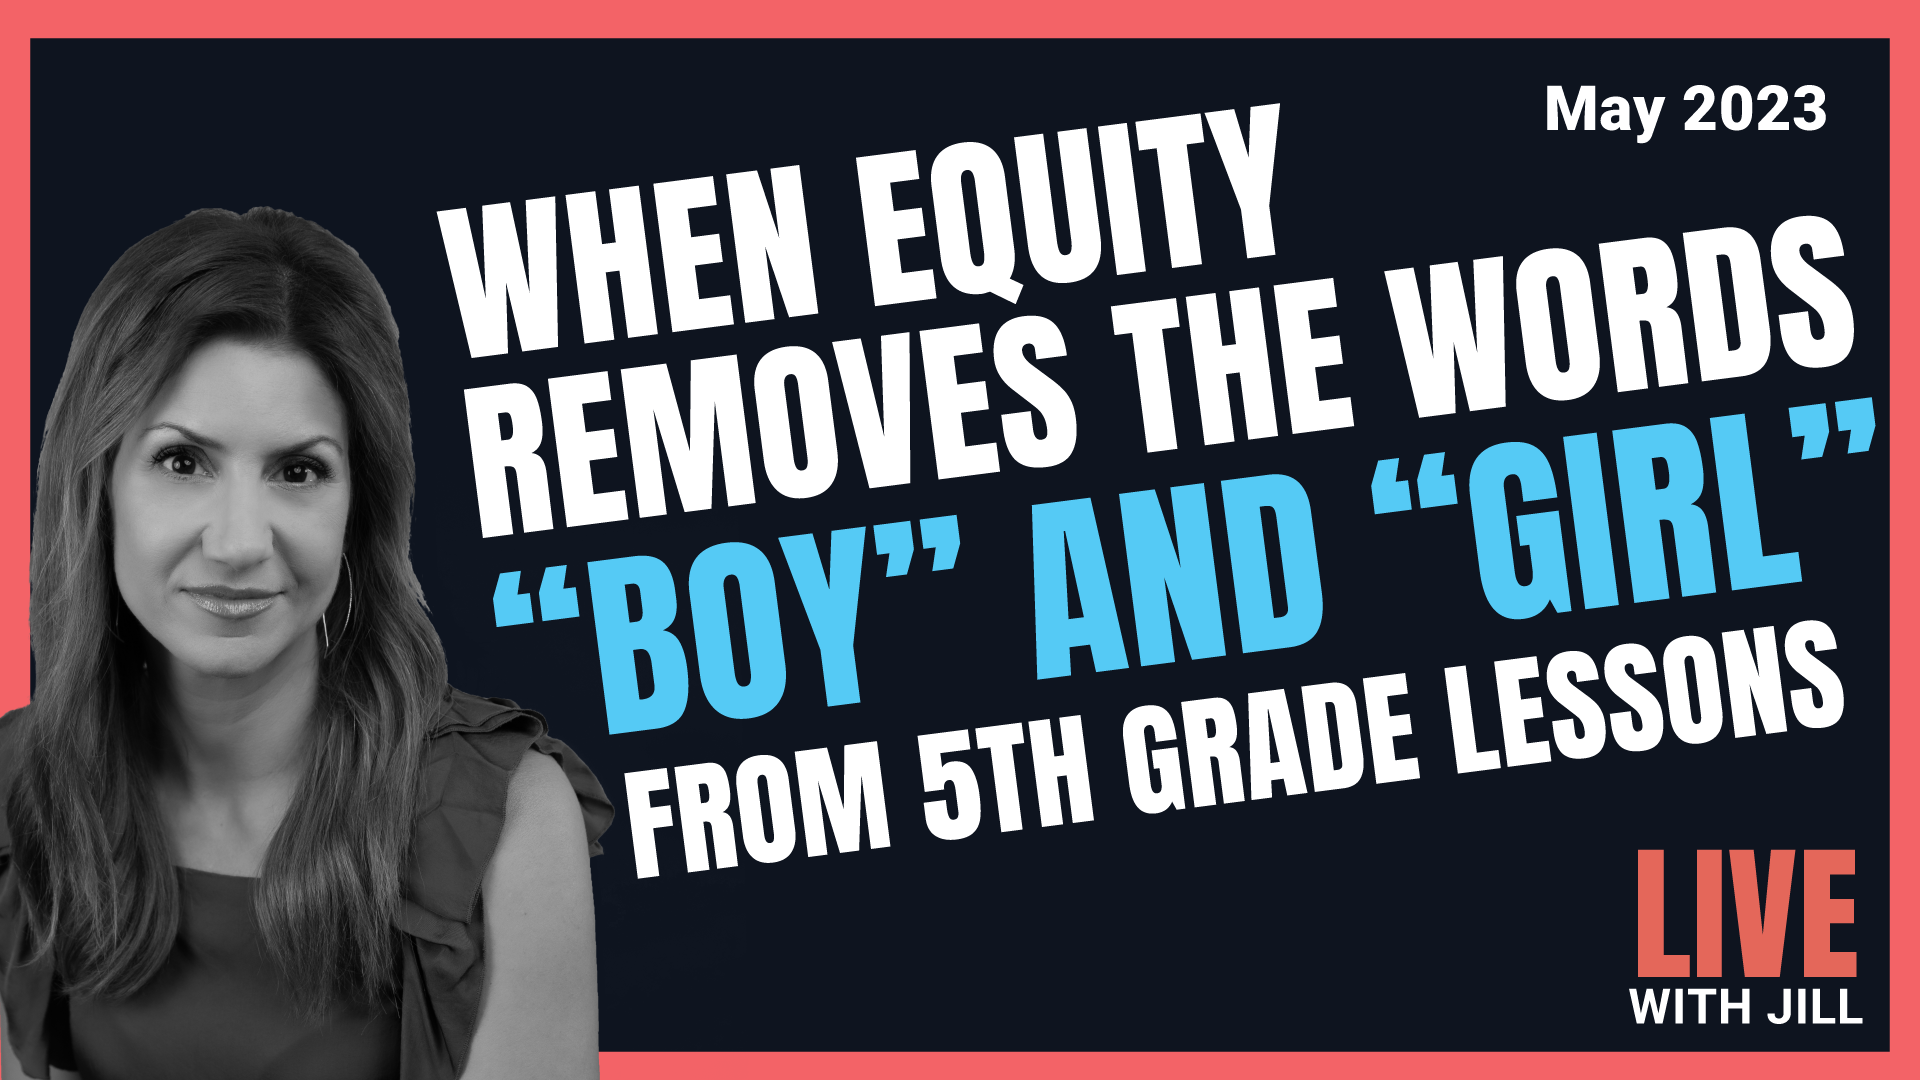 When Equity Removes the Words “Boy” and “Girl” from 5th Grade Lessons